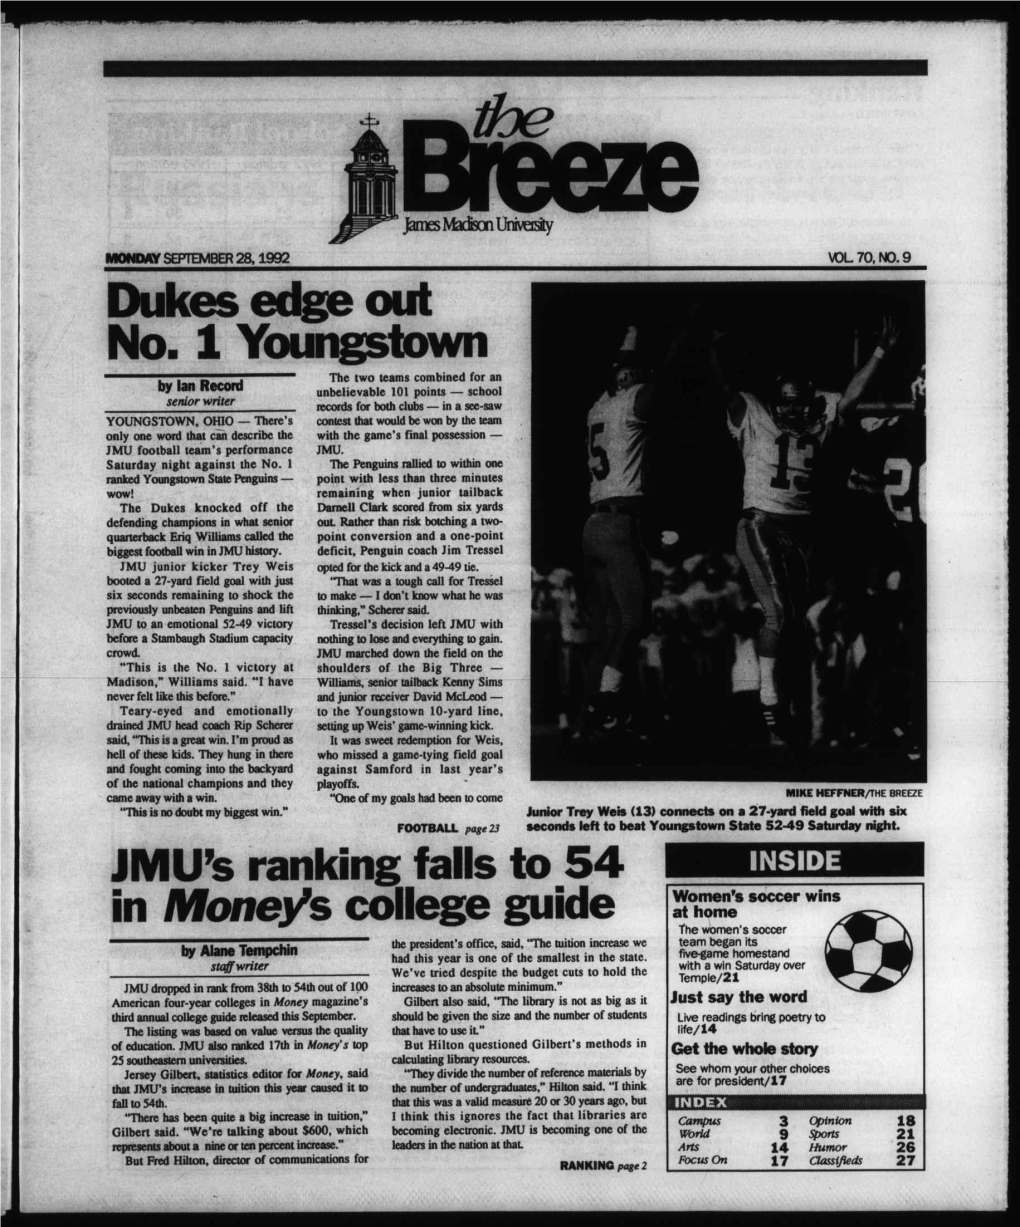 SEPTEMBER 28, 1992 University of New Hampshire, 2-0, Saturday in 2